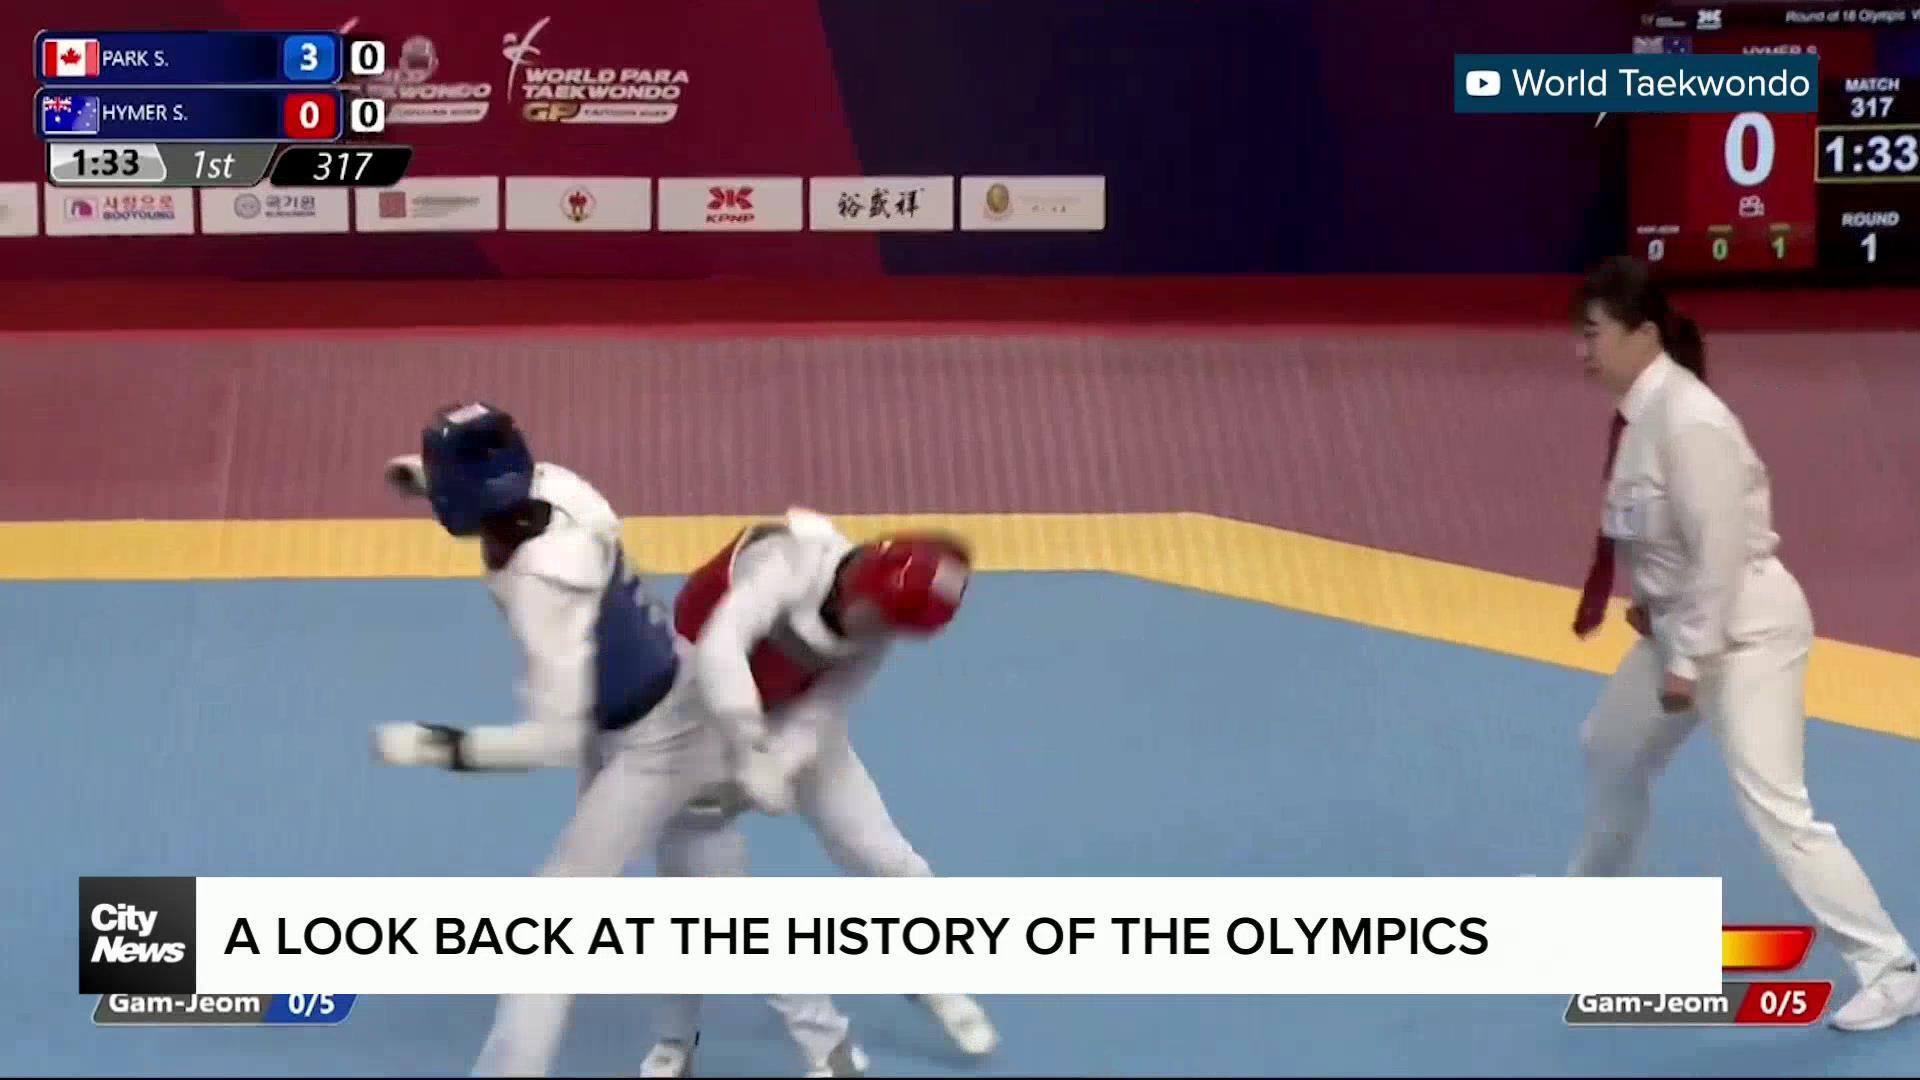 Looking back at the history of the Olympics